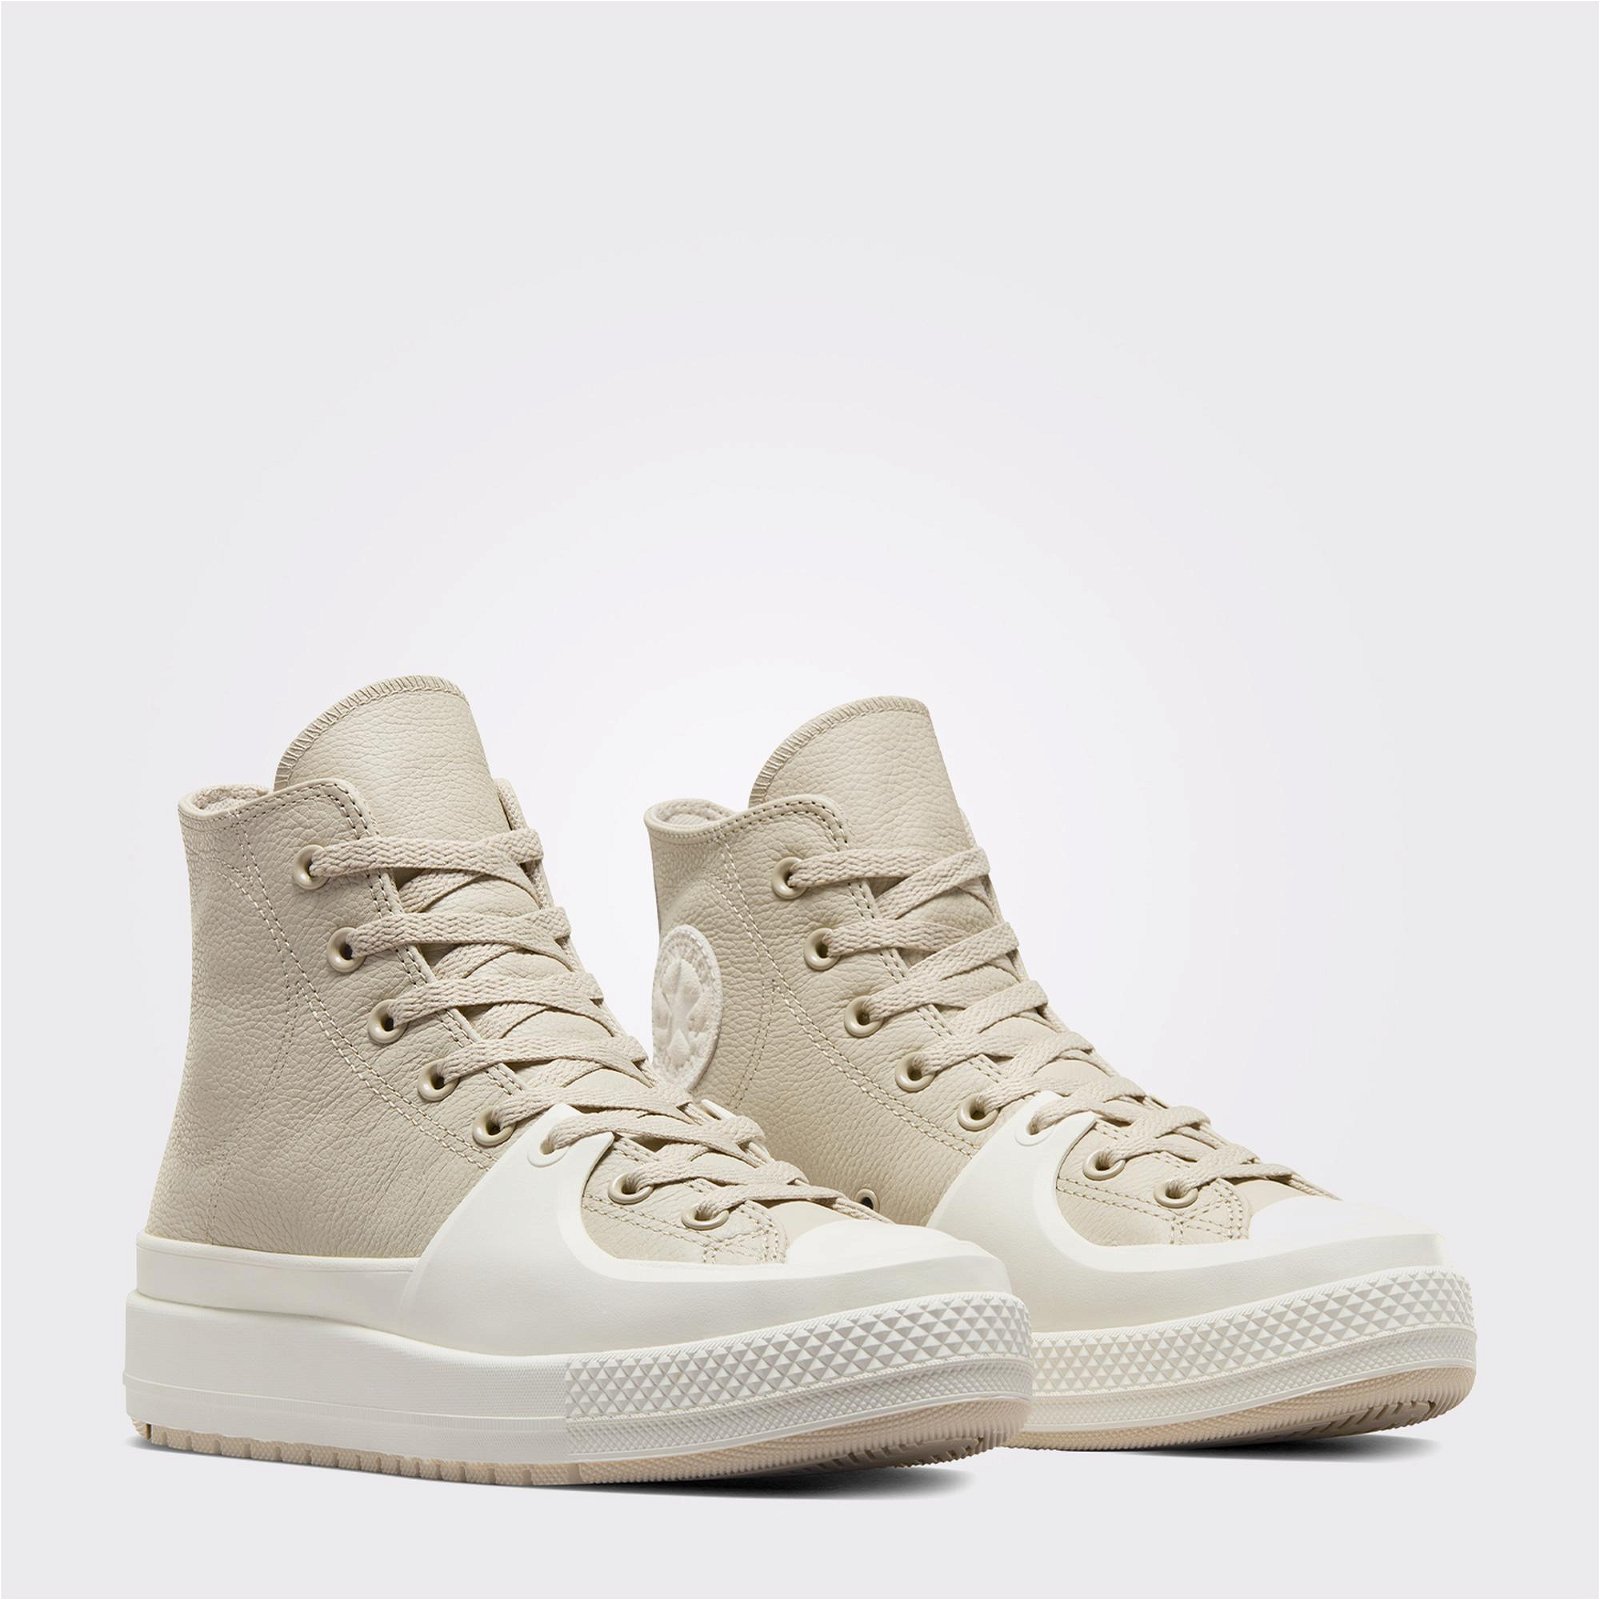 Converse Chuck Taylor All Star Construct Leather Unisex Bej Sneaker